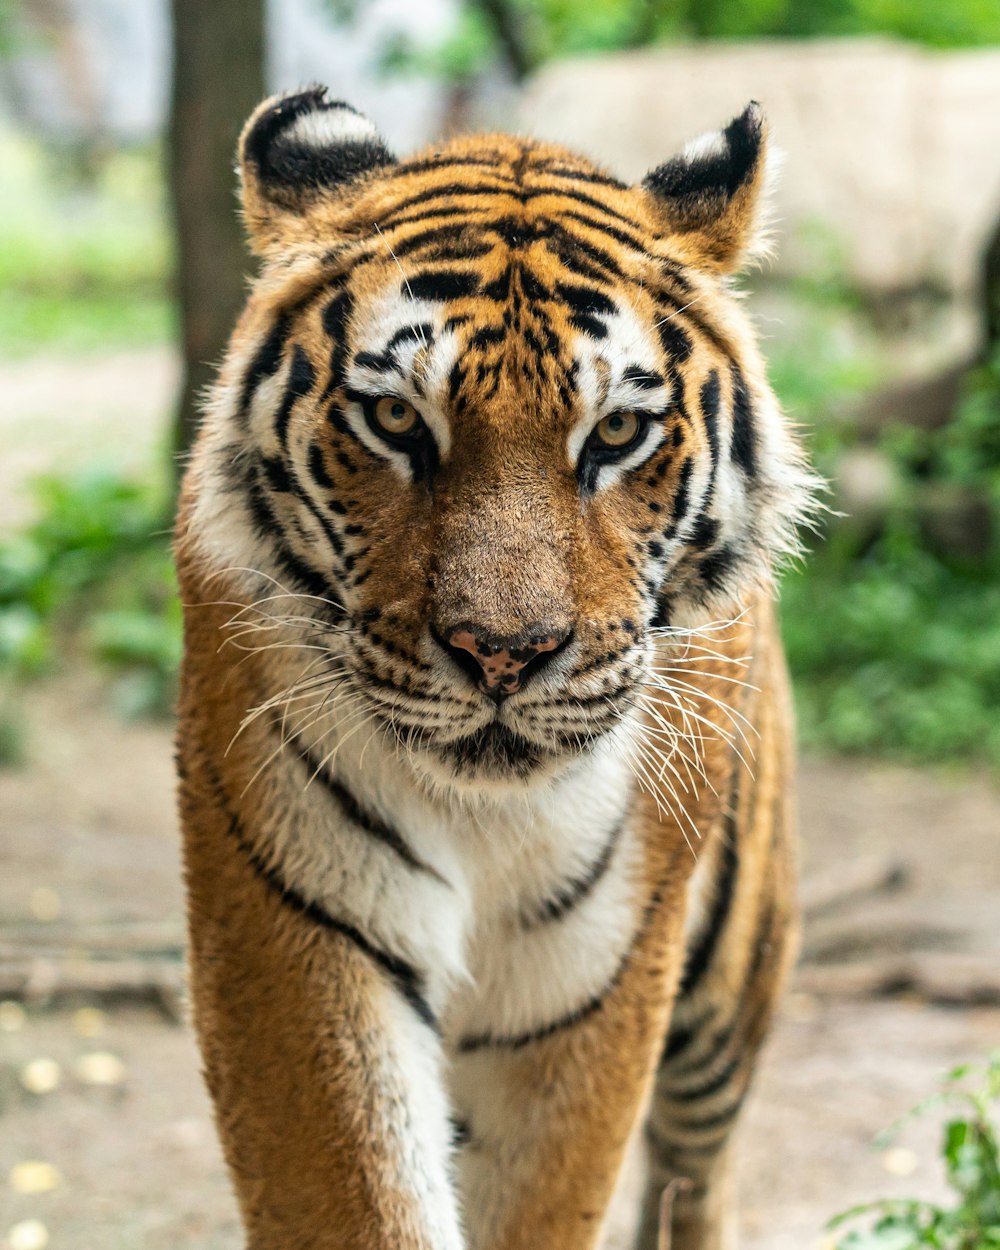 Tiger Pictures | Download Free Images & Stock Photos on Unsplash